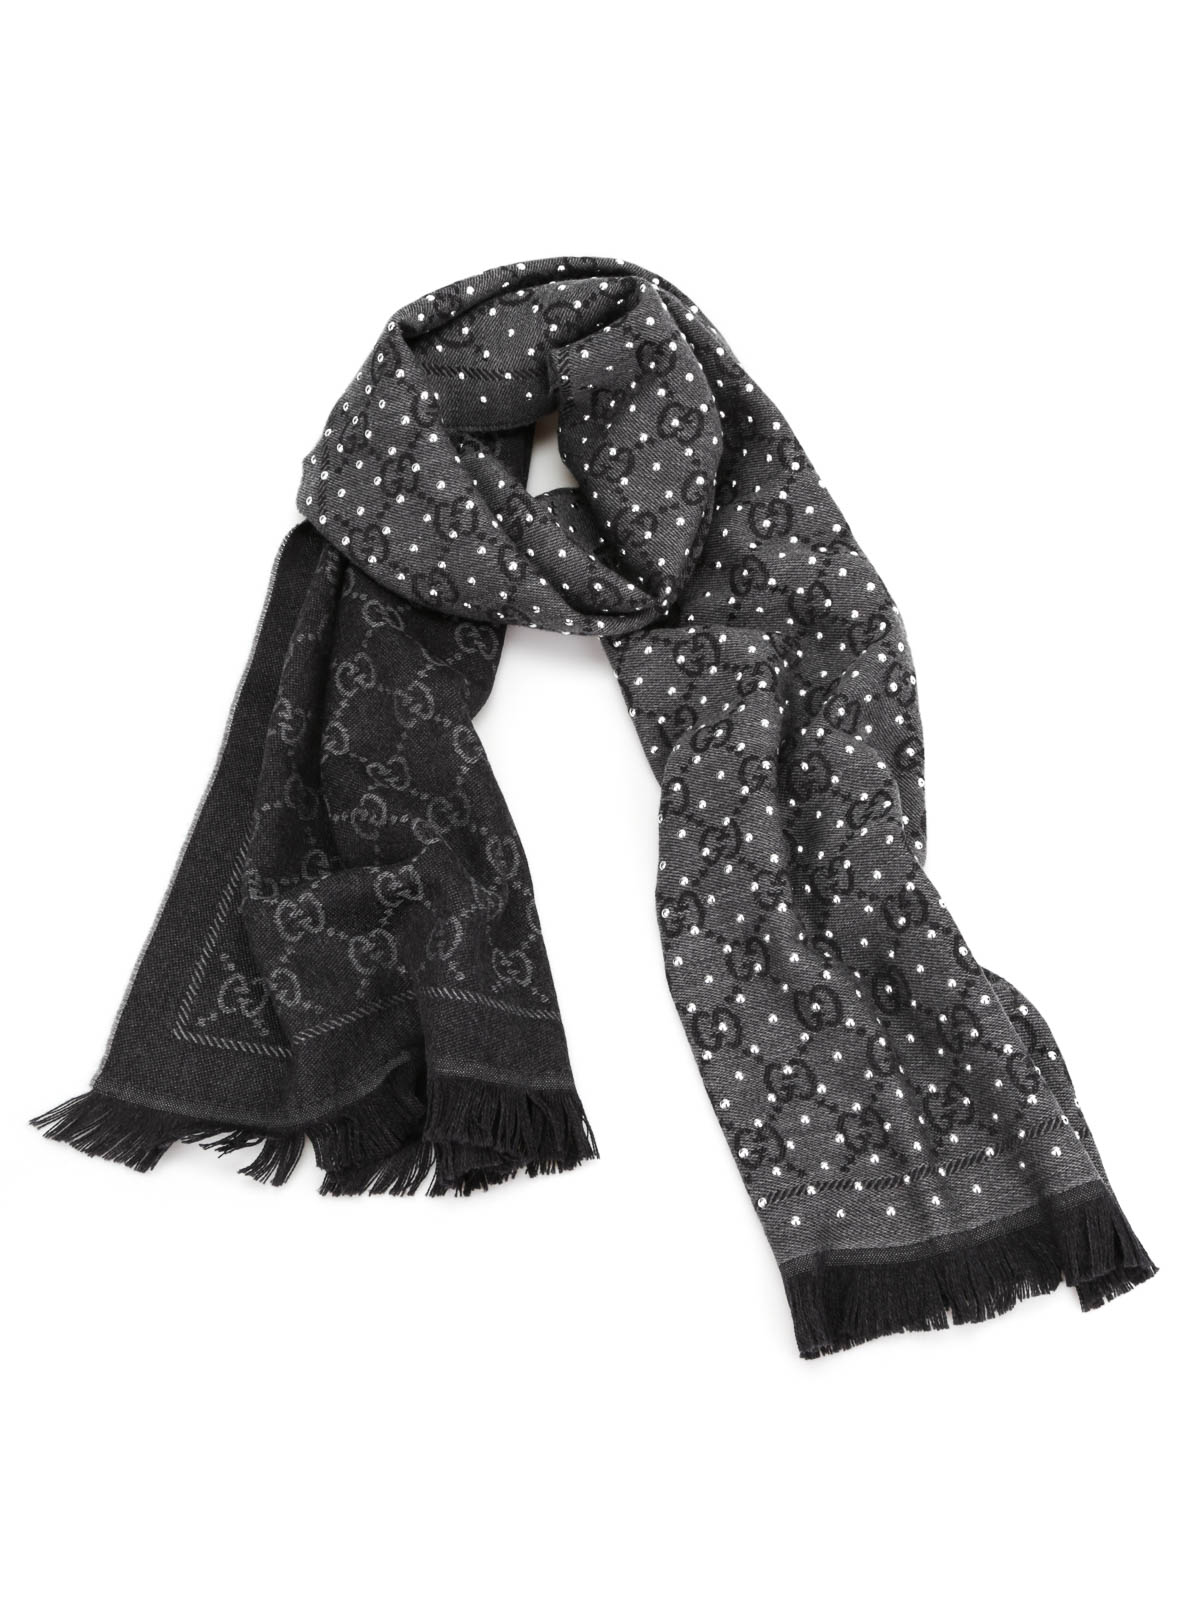 Gucci - GG jacquard wool scarf with studs - scarves - 391380 3G433 1163